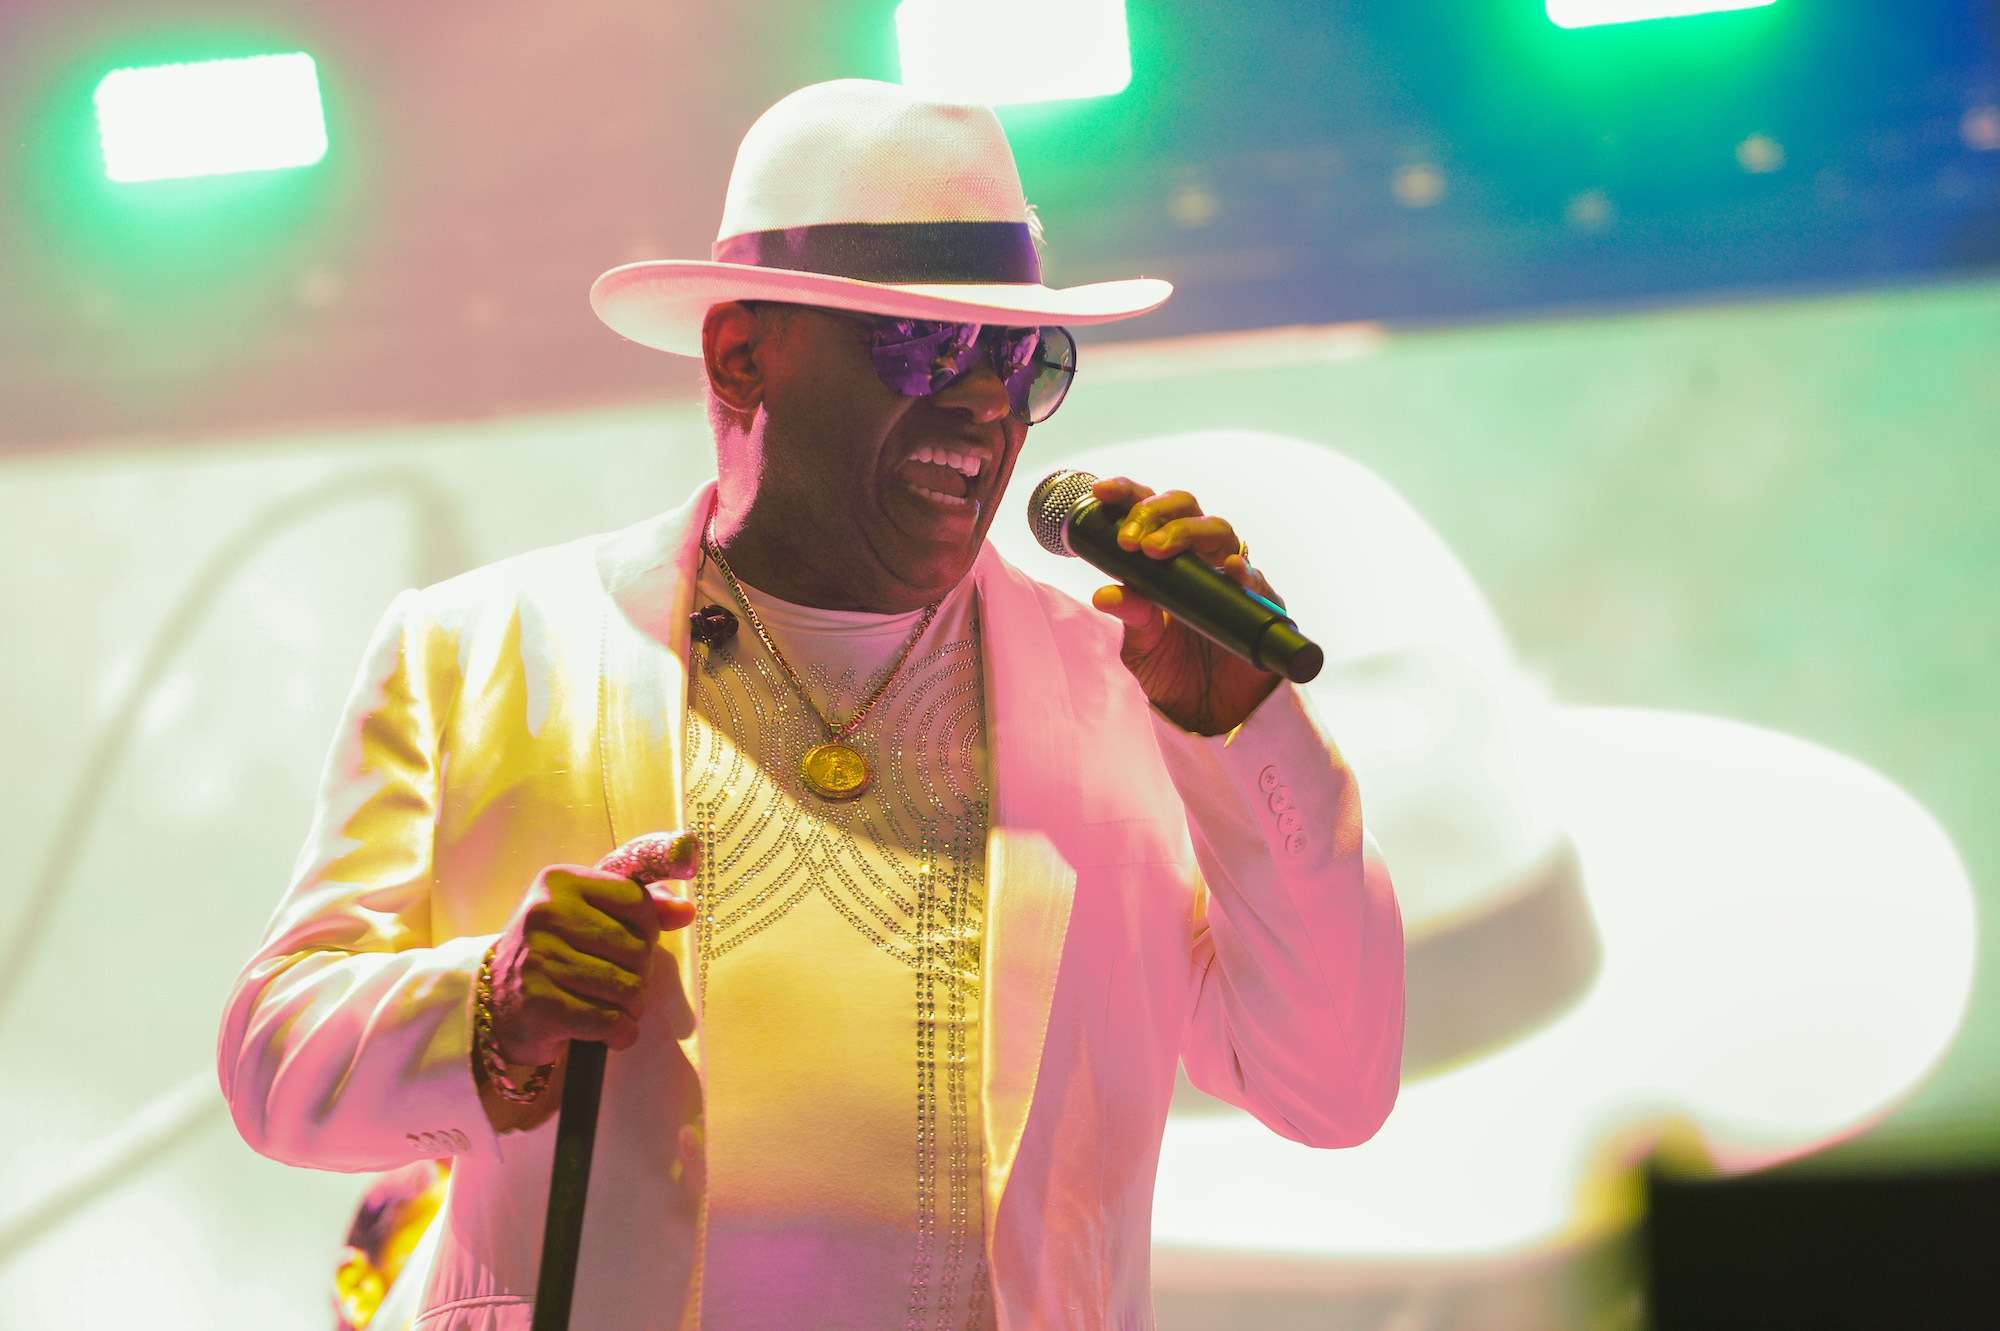 The Isley Brothers Live at Pitchfork [GALLERY] 4